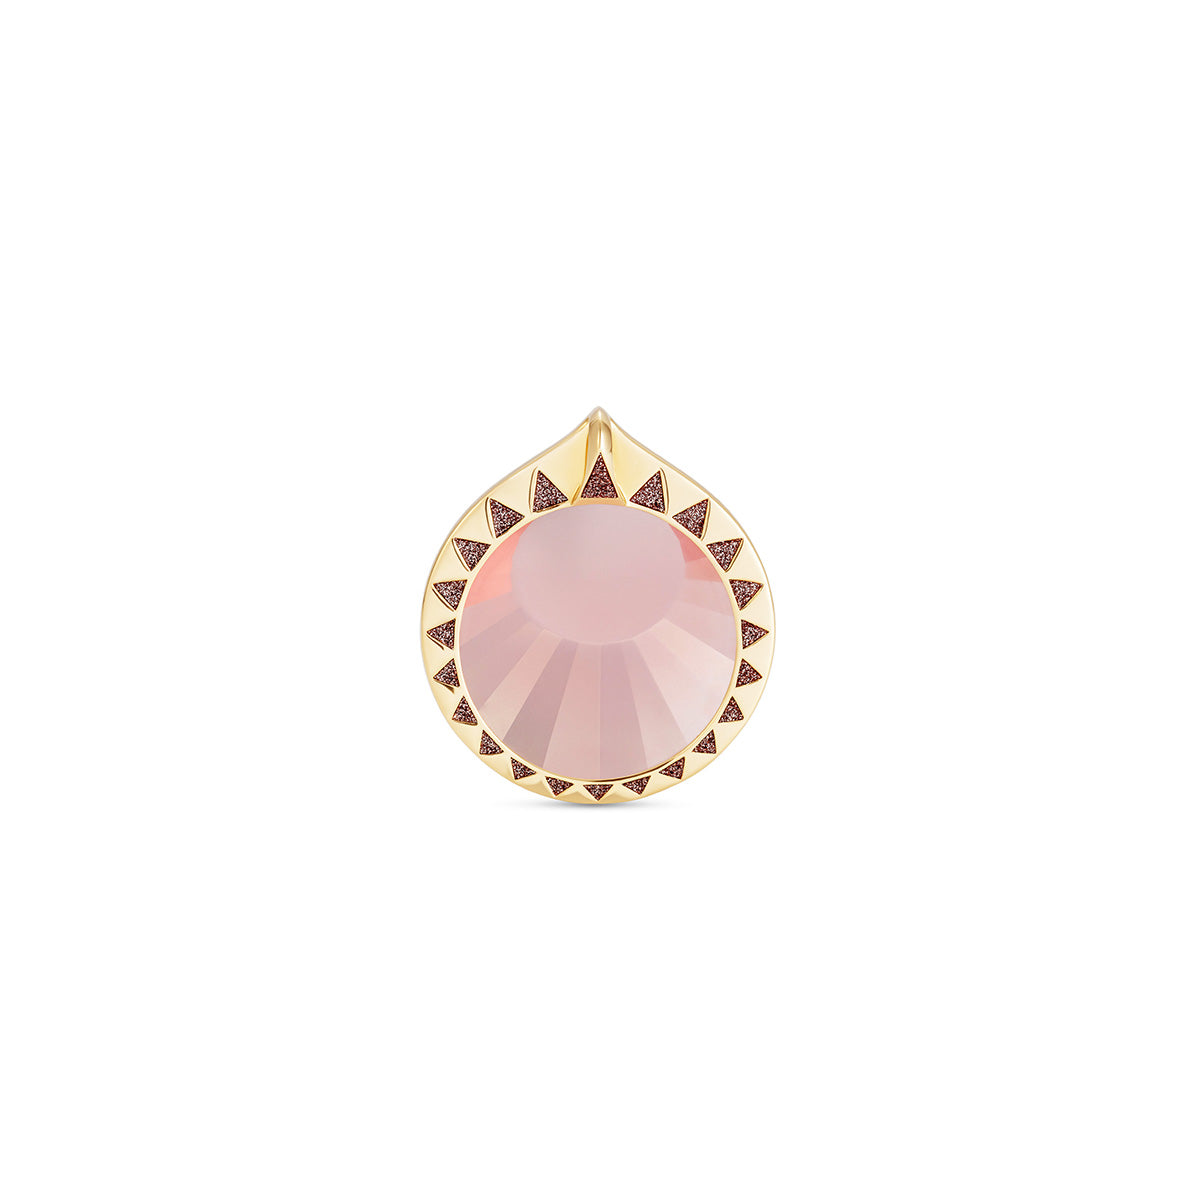 Noor Fares 18K Yellow Gold Rose Quartz Pendant with Coloured Sapphire Pavé and Pink Glitter Enamel